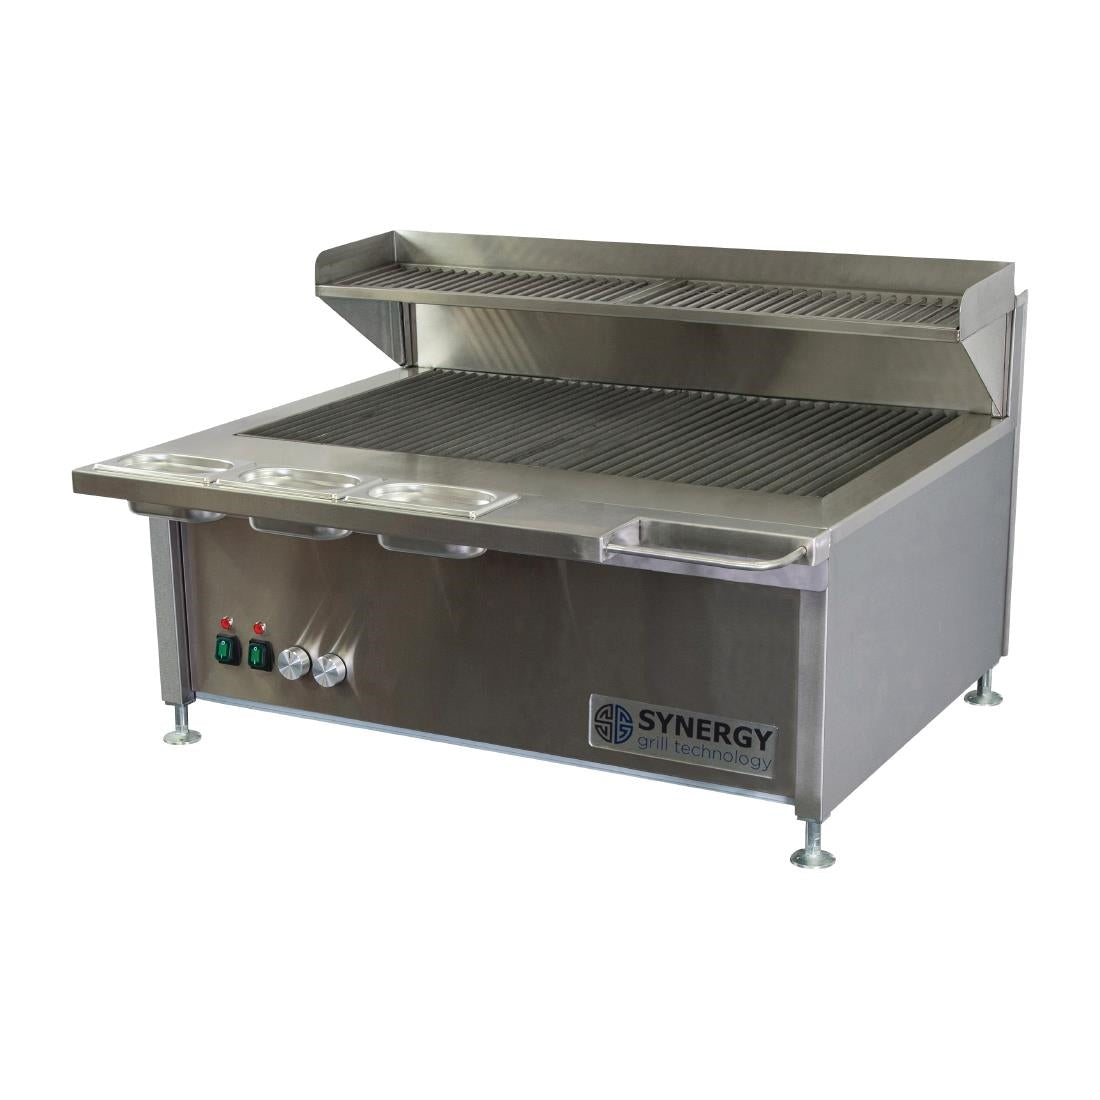 Synergy ST900 Deep with Garnish Rail and Slow Cook Shelf - FD490